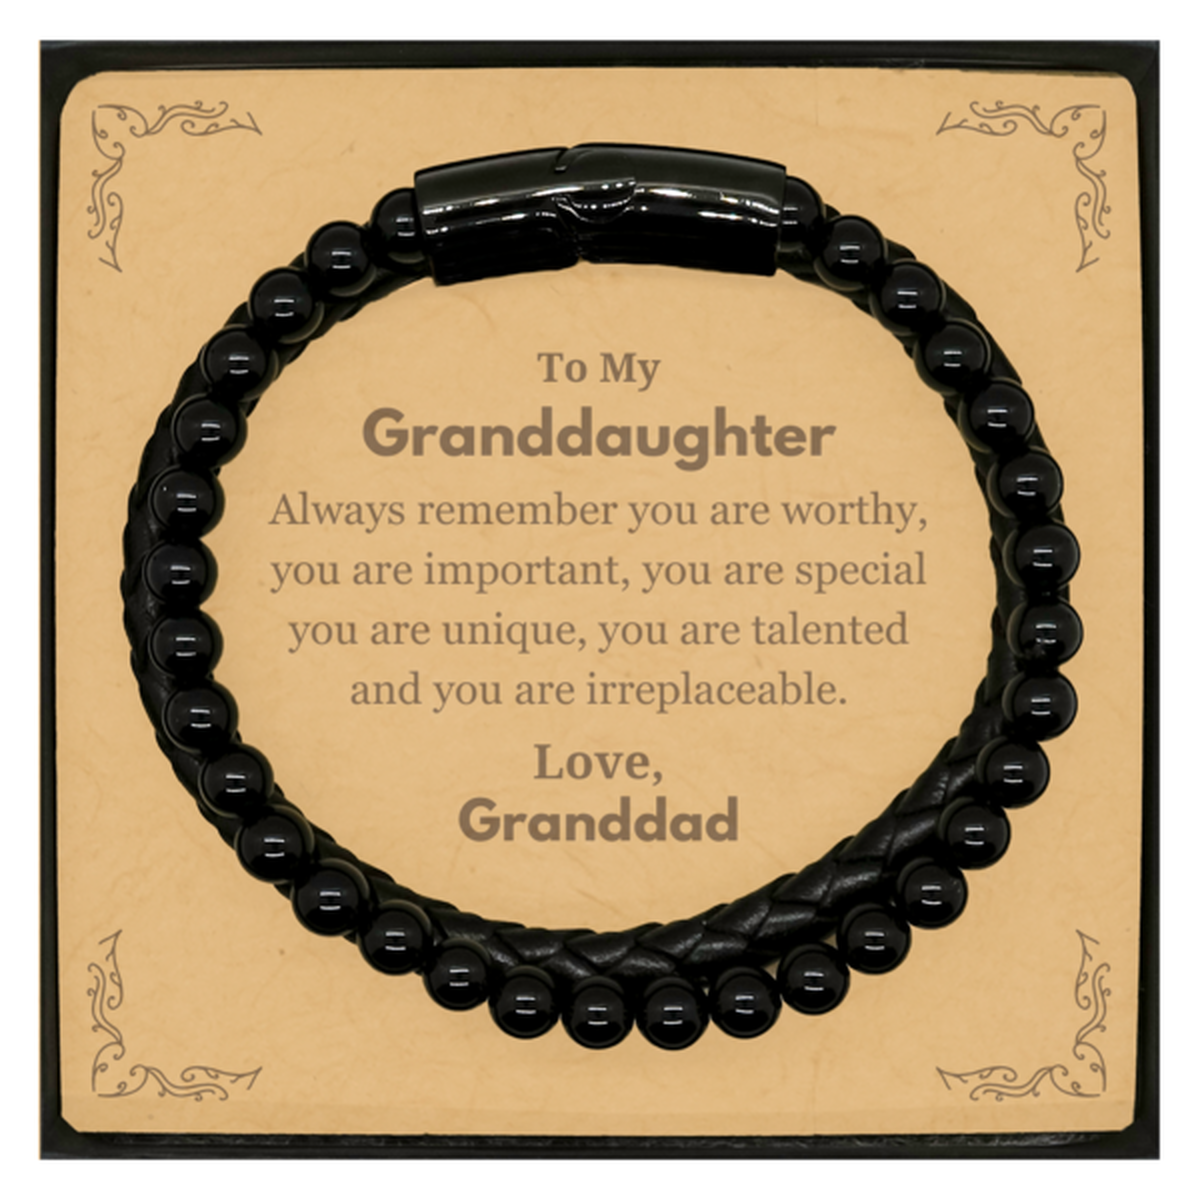 Granddaughter Birthday Gifts from Granddad, Inspirational Stone Leather Bracelets for Granddaughter Christmas Graduation Gifts for Granddaughter Always remember you are worthy, you are important. Love, Granddad